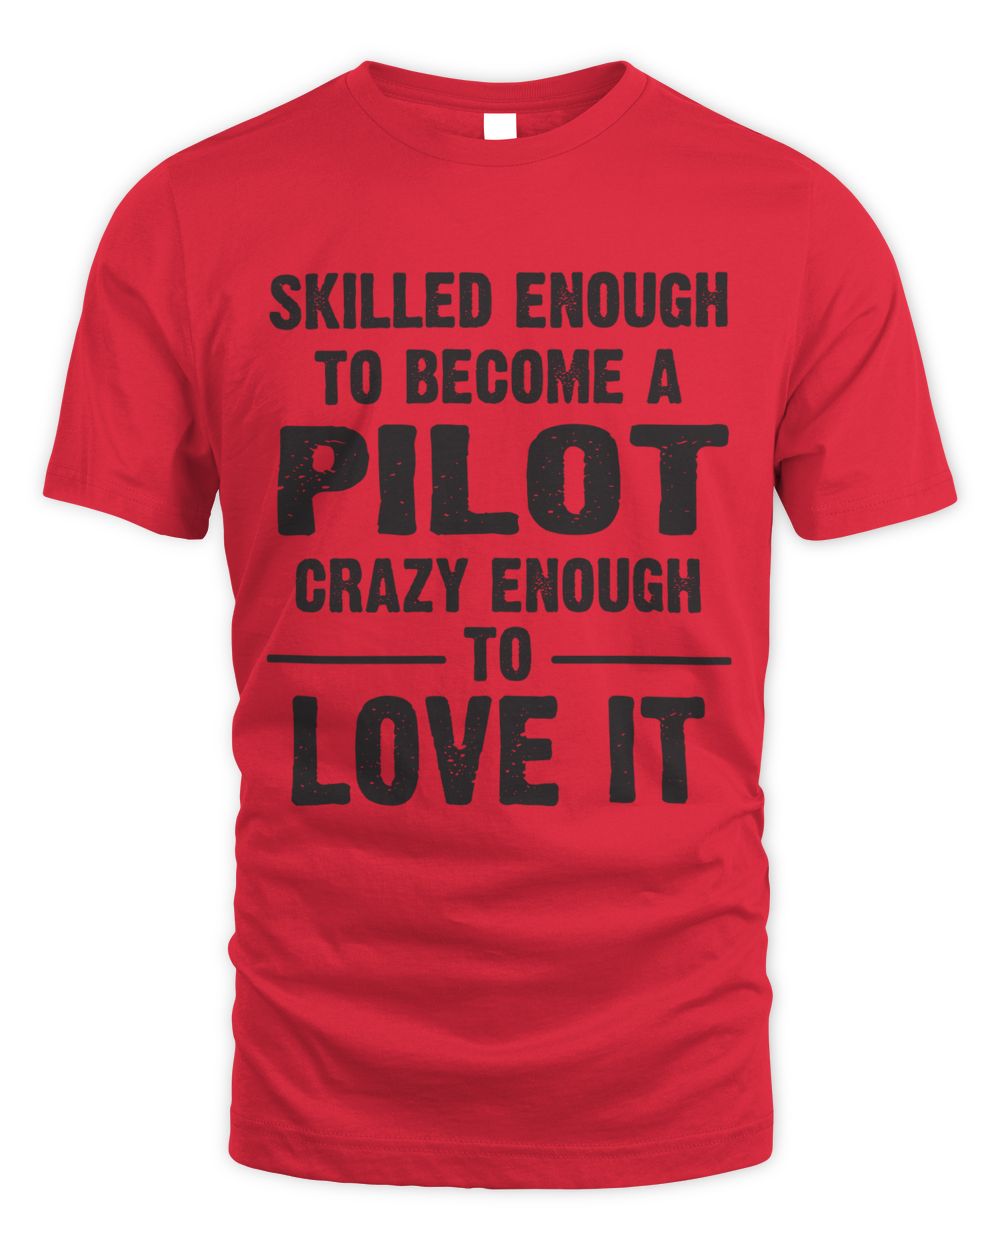 Skilled enough to become a pilot crazy enough to love it Unisex Standard T-Shirt red 